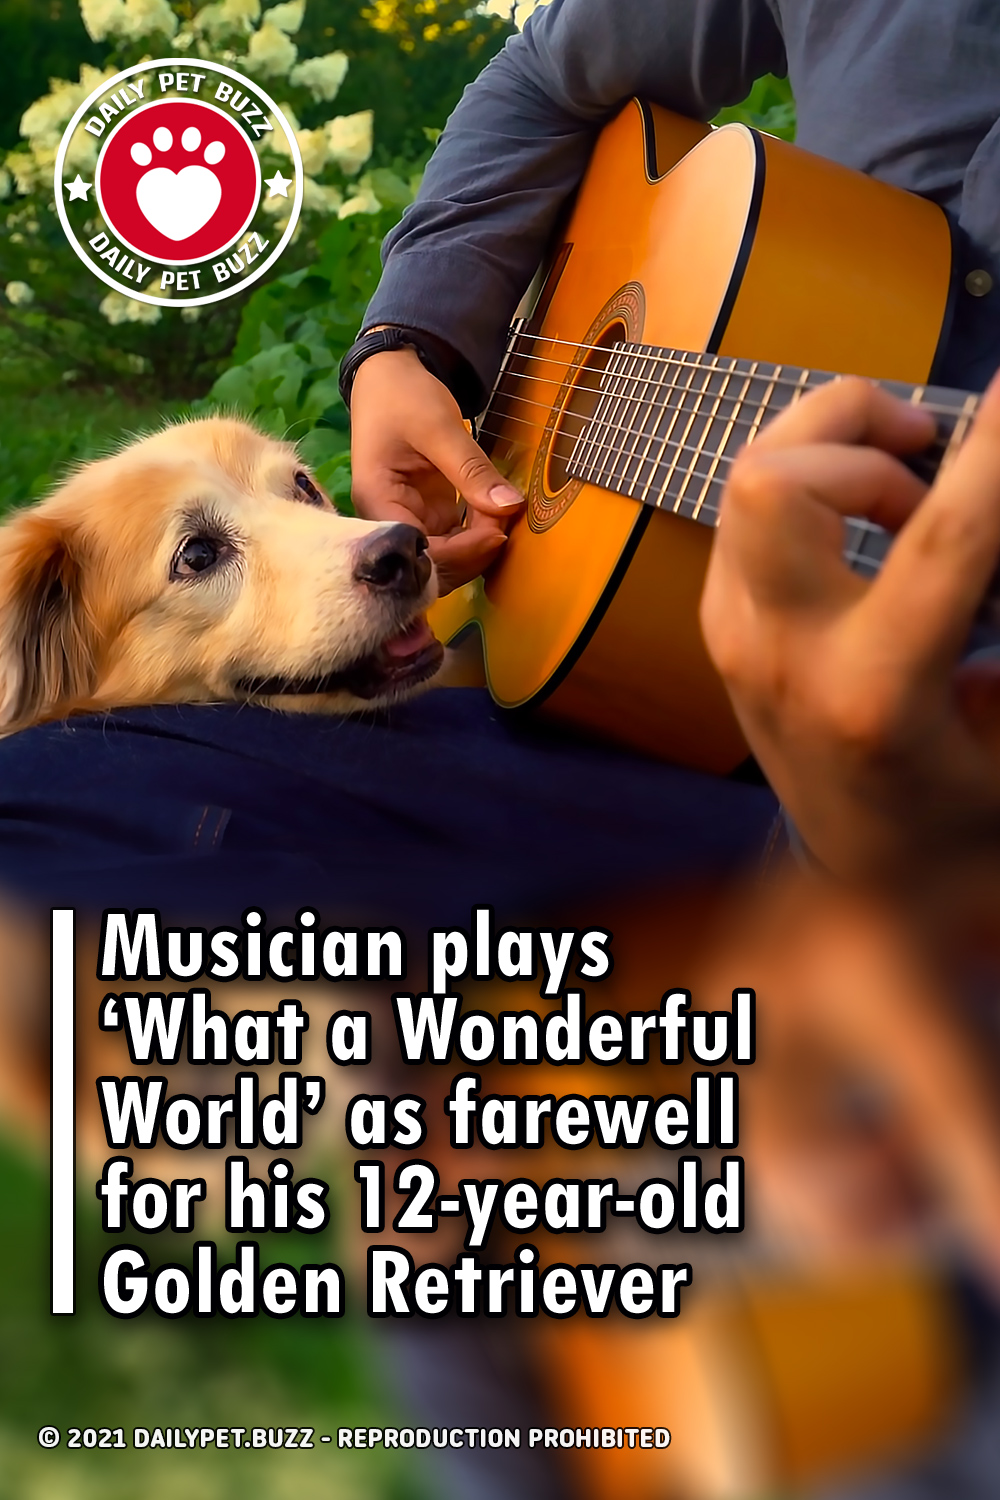 Musician plays ‘What a Wonderful World’ as farewell for his 12-year-old Golden Retriever